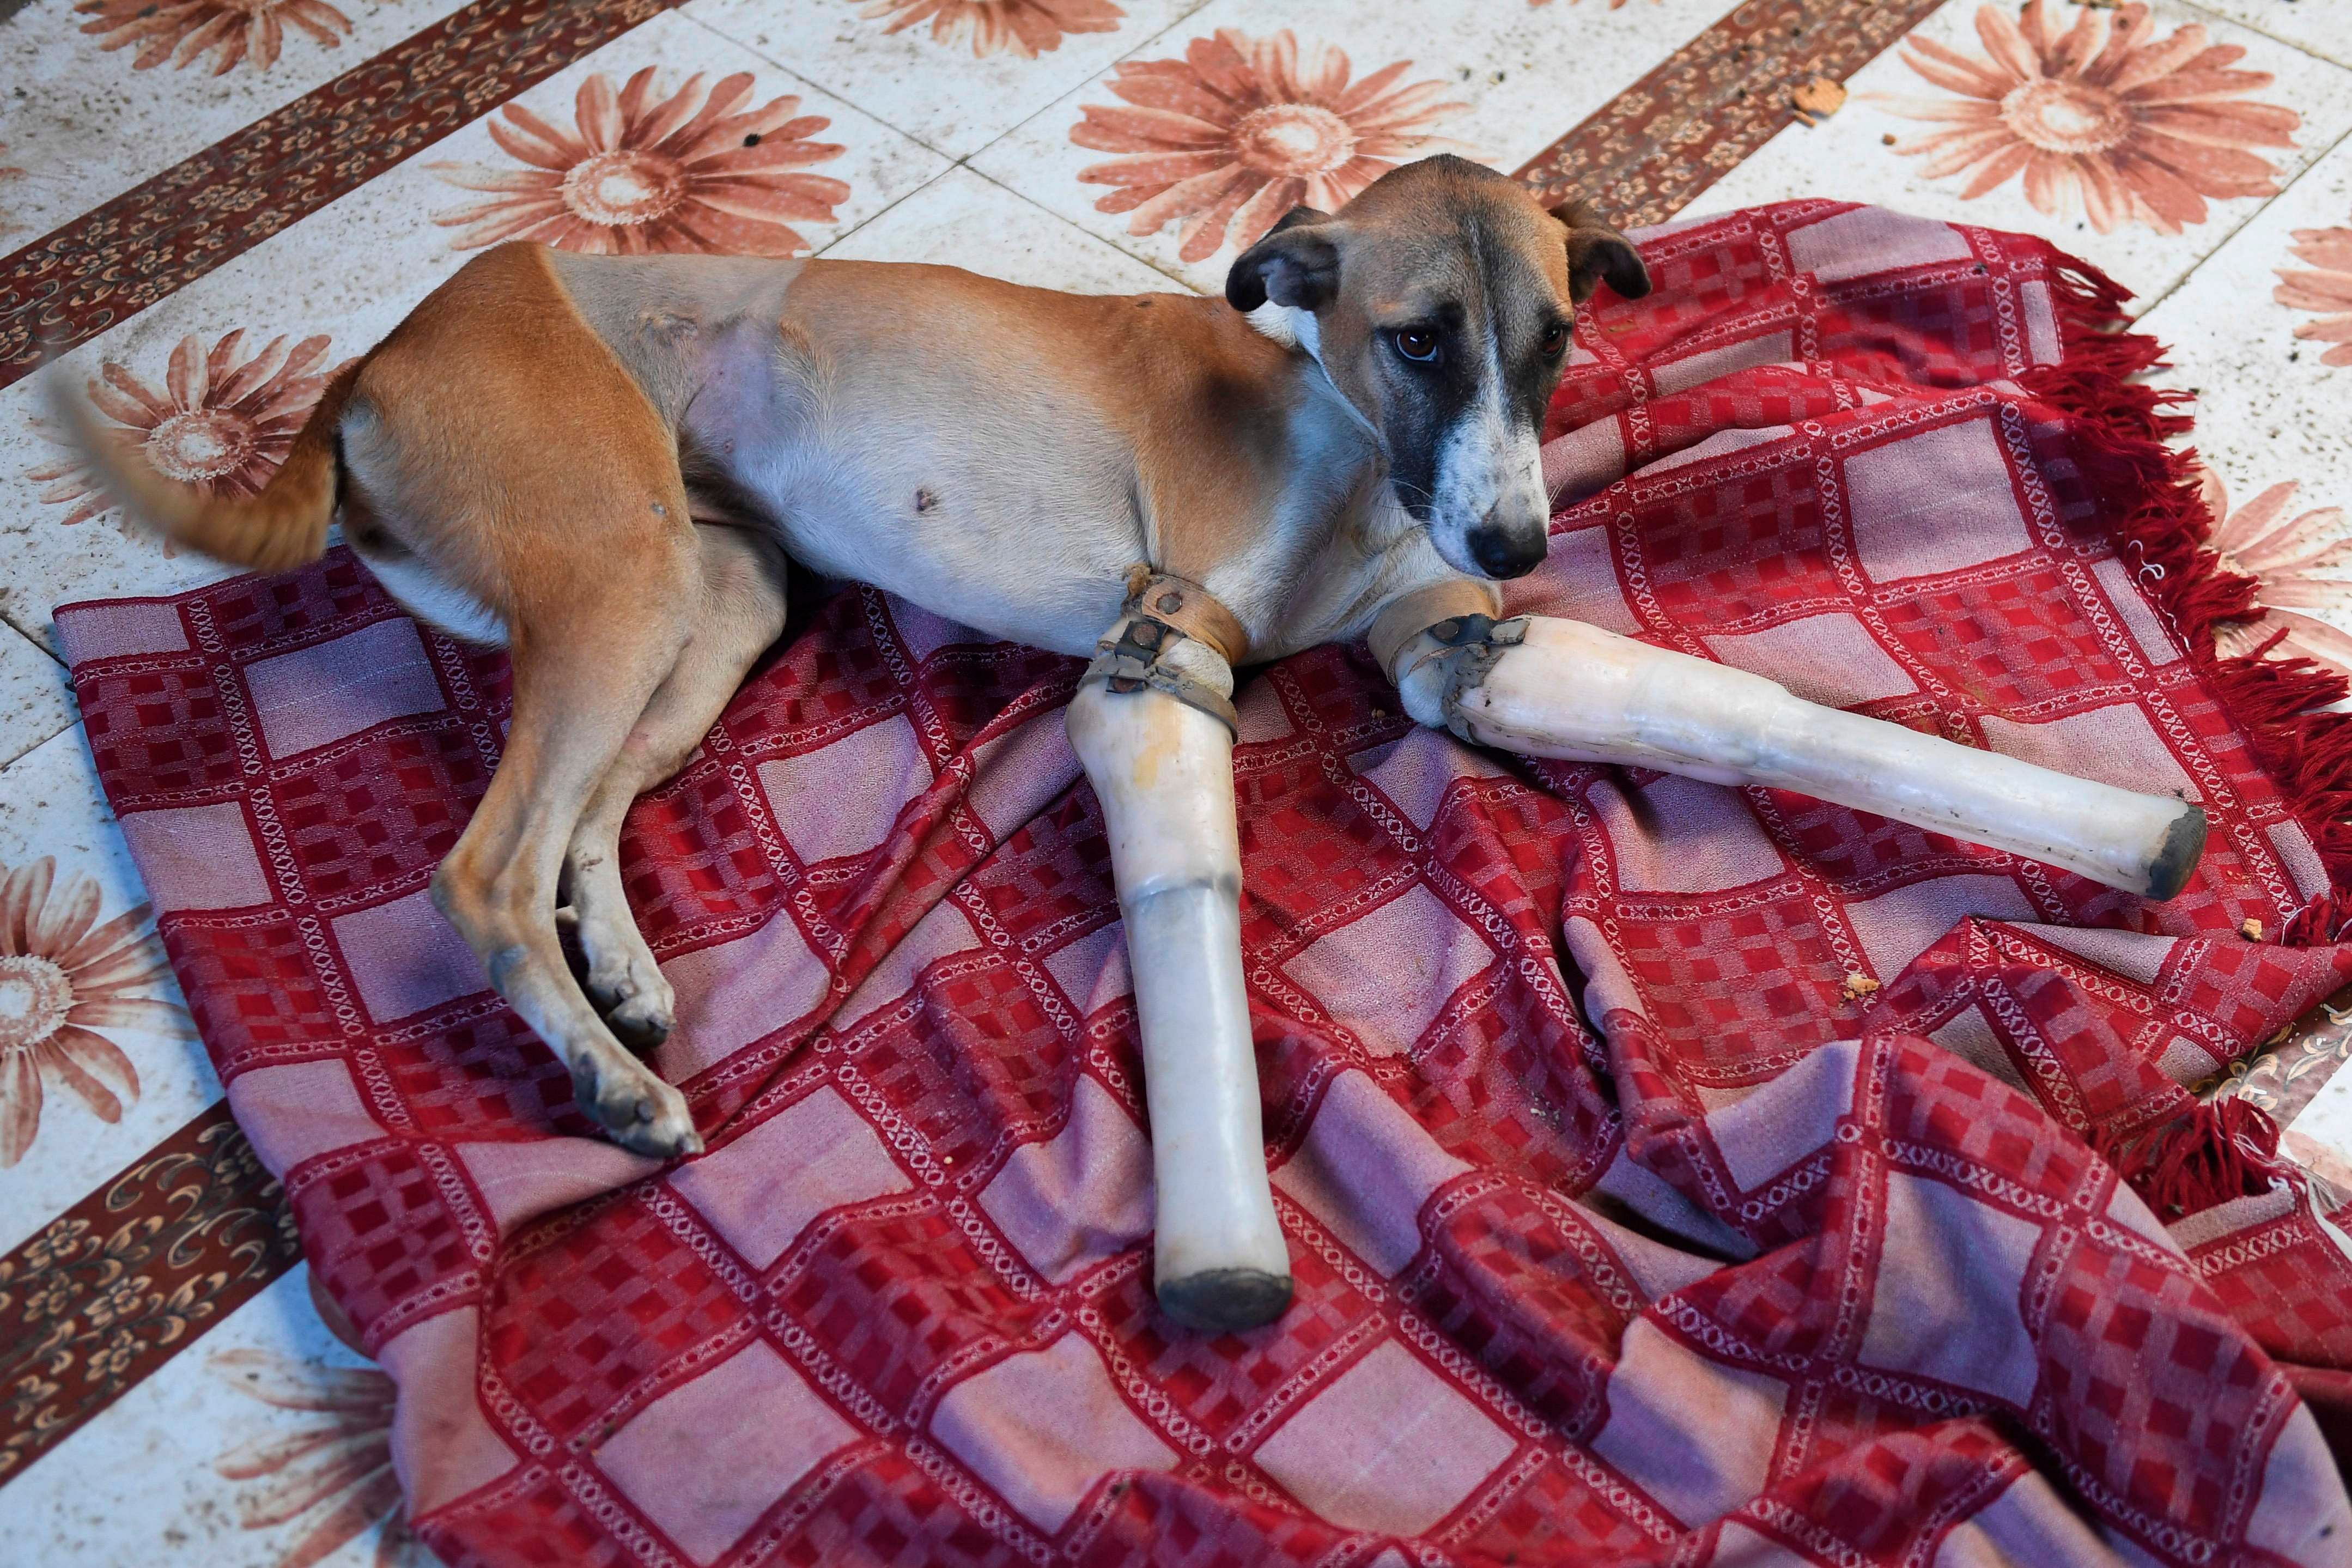 Rocky, a female dog who lost her front legs in a train accident, rests at the People For Animal Trust in Faridabad on November 17, 2020. - A street dog that had its front legs after being run over by a train in northern India has found a new home in Britain after enduring a year of surgeries and learning to walk again with new prosthetics. Credit: AFP Photo